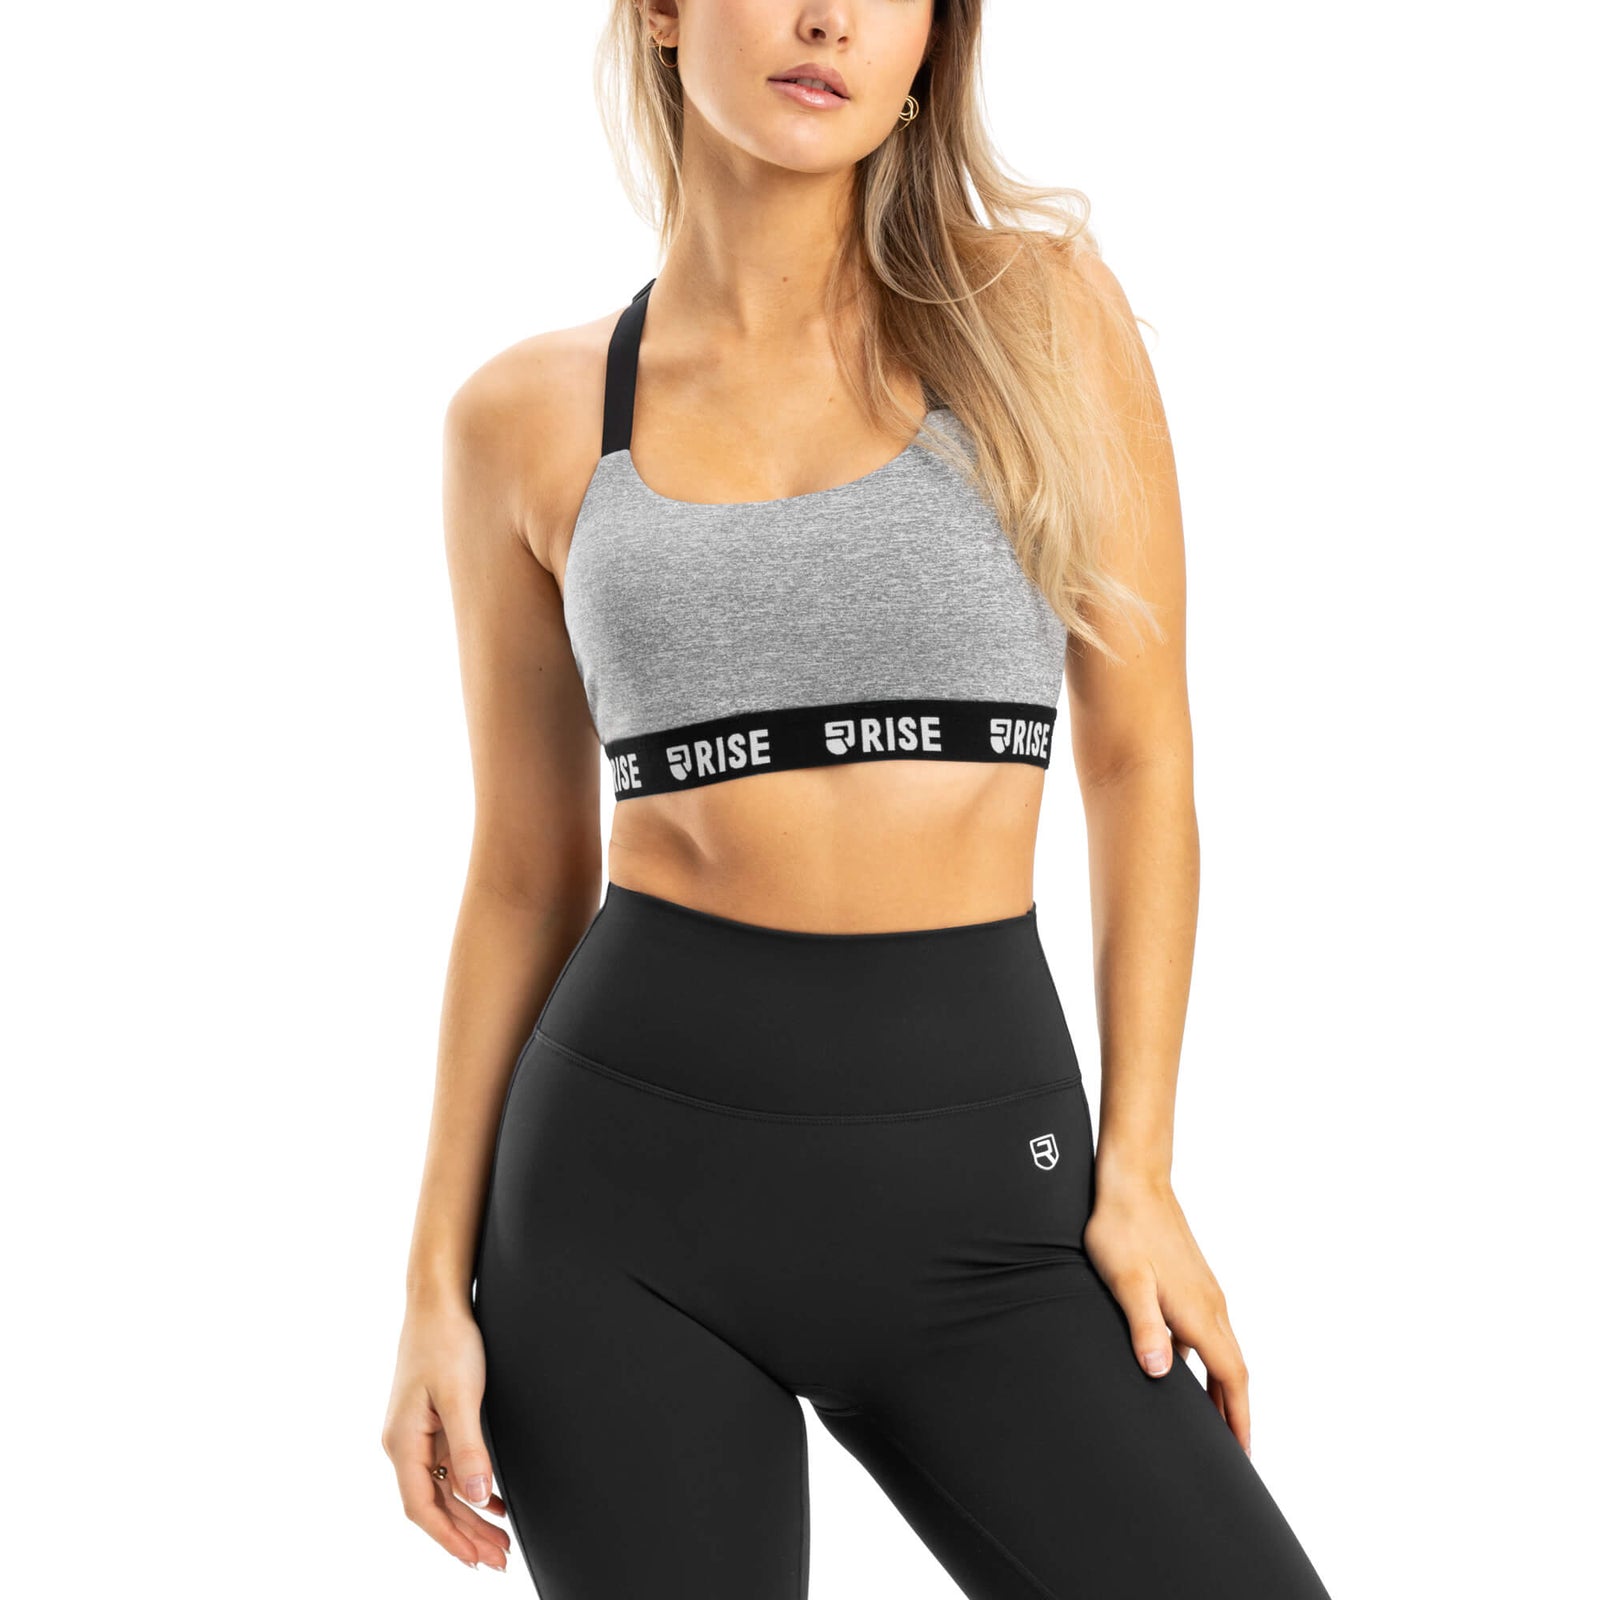 GRIT AND GRIND White Women's Sports Bra